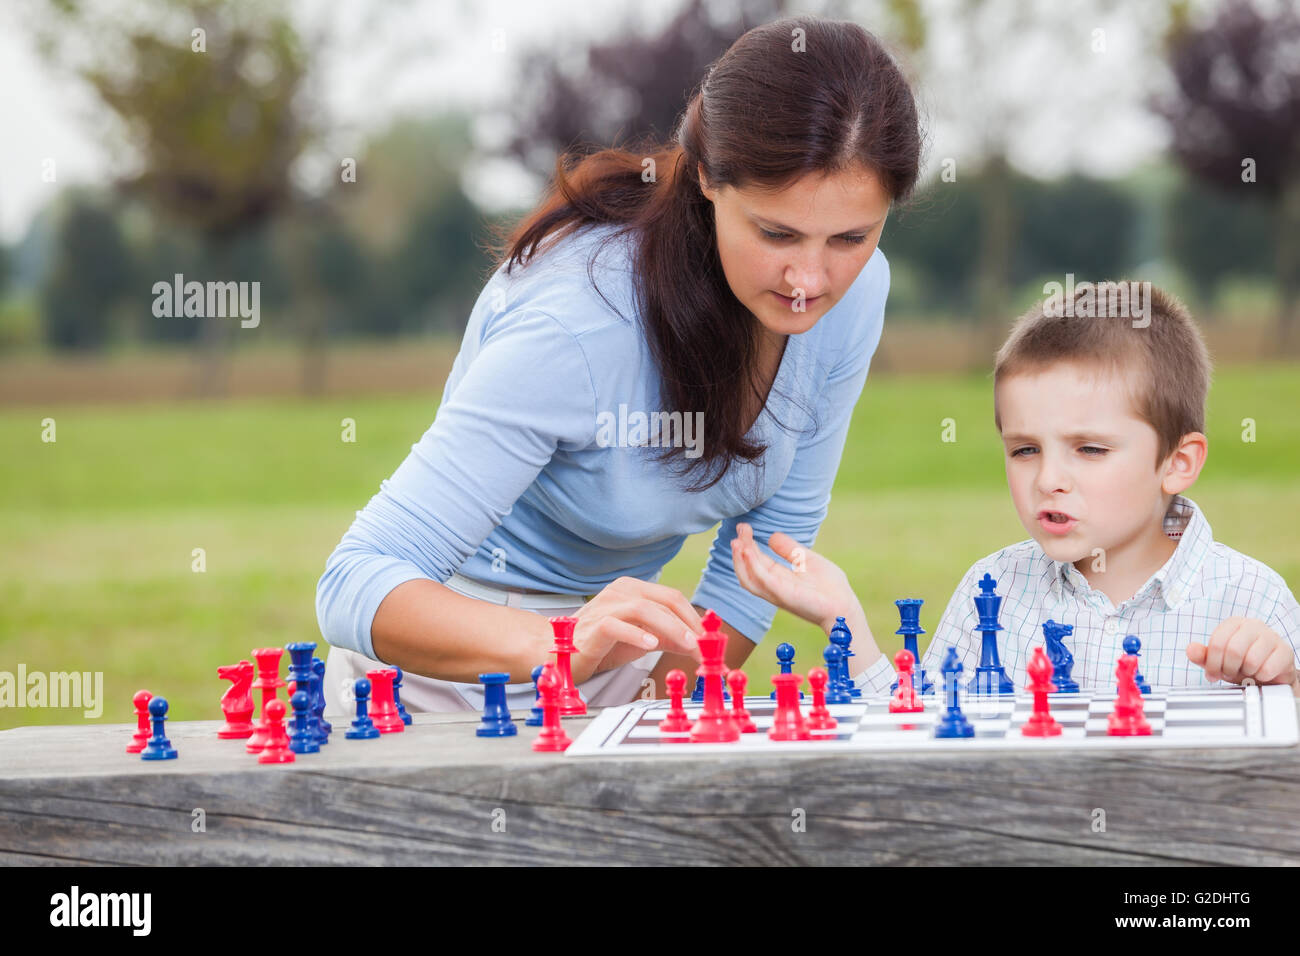 Elegant young boy in white shirt and his mother learning to play chess with blue and red chess pieces on wood table in the park Stock Photo